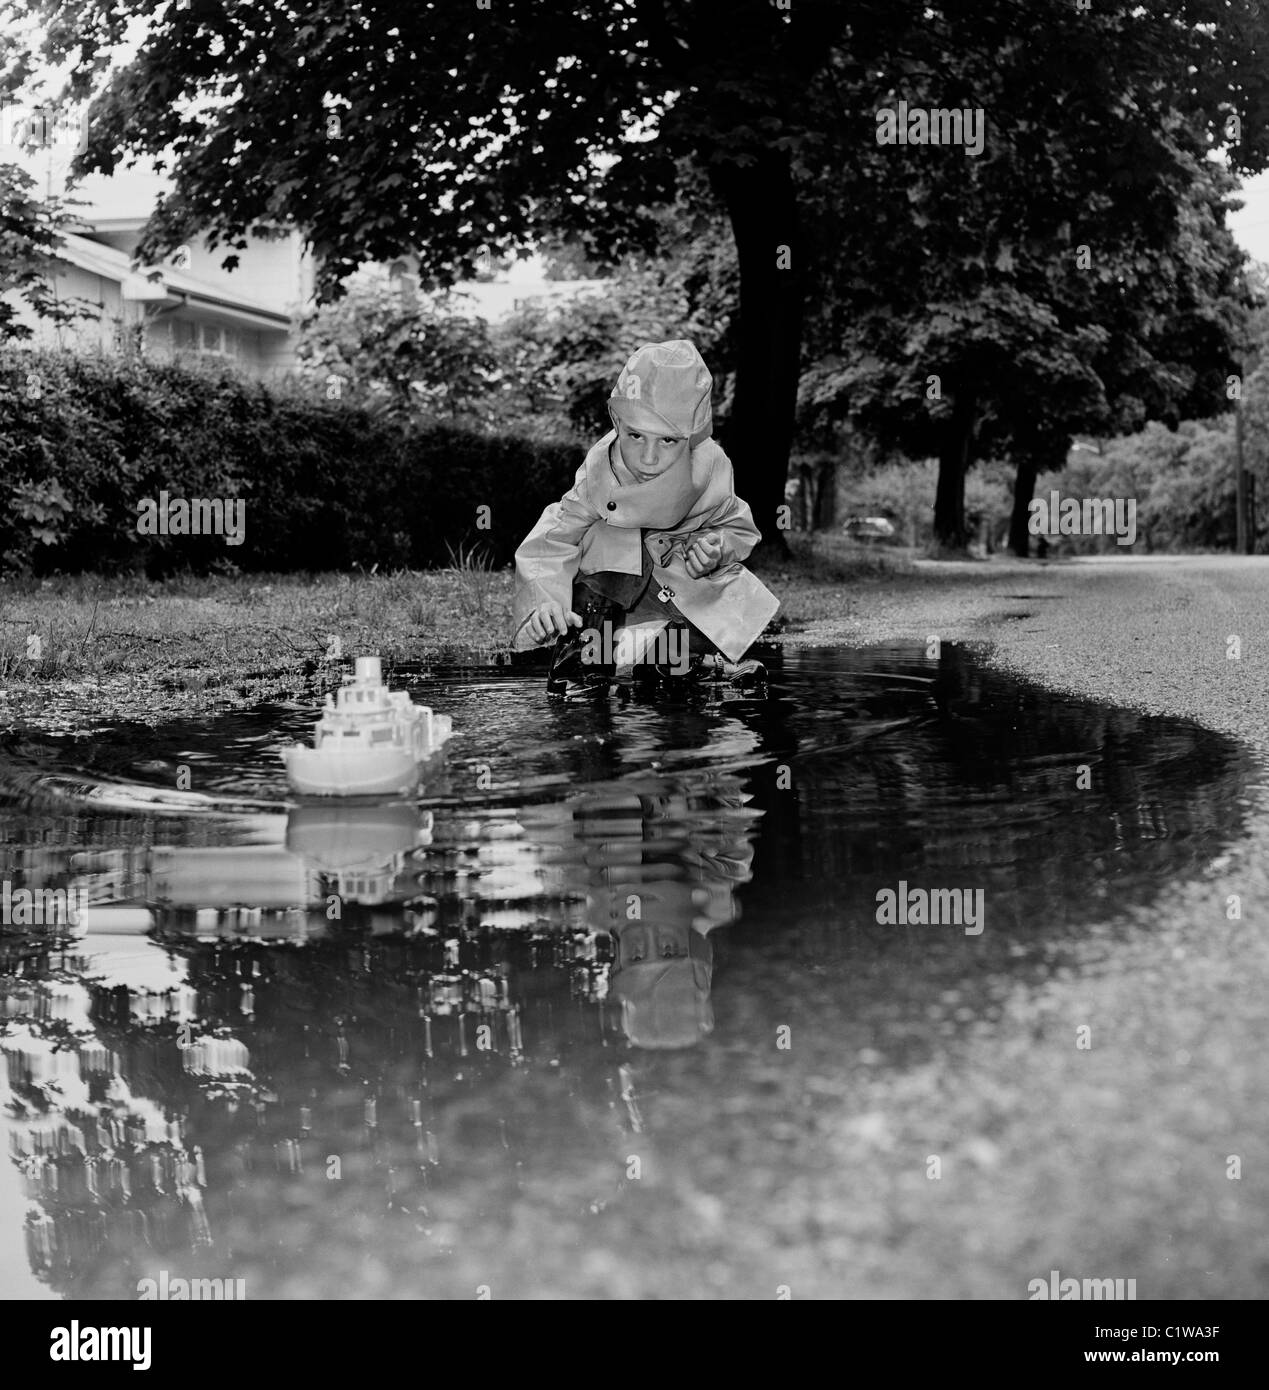 Boy playing with toy boat in puddle Stock Photo